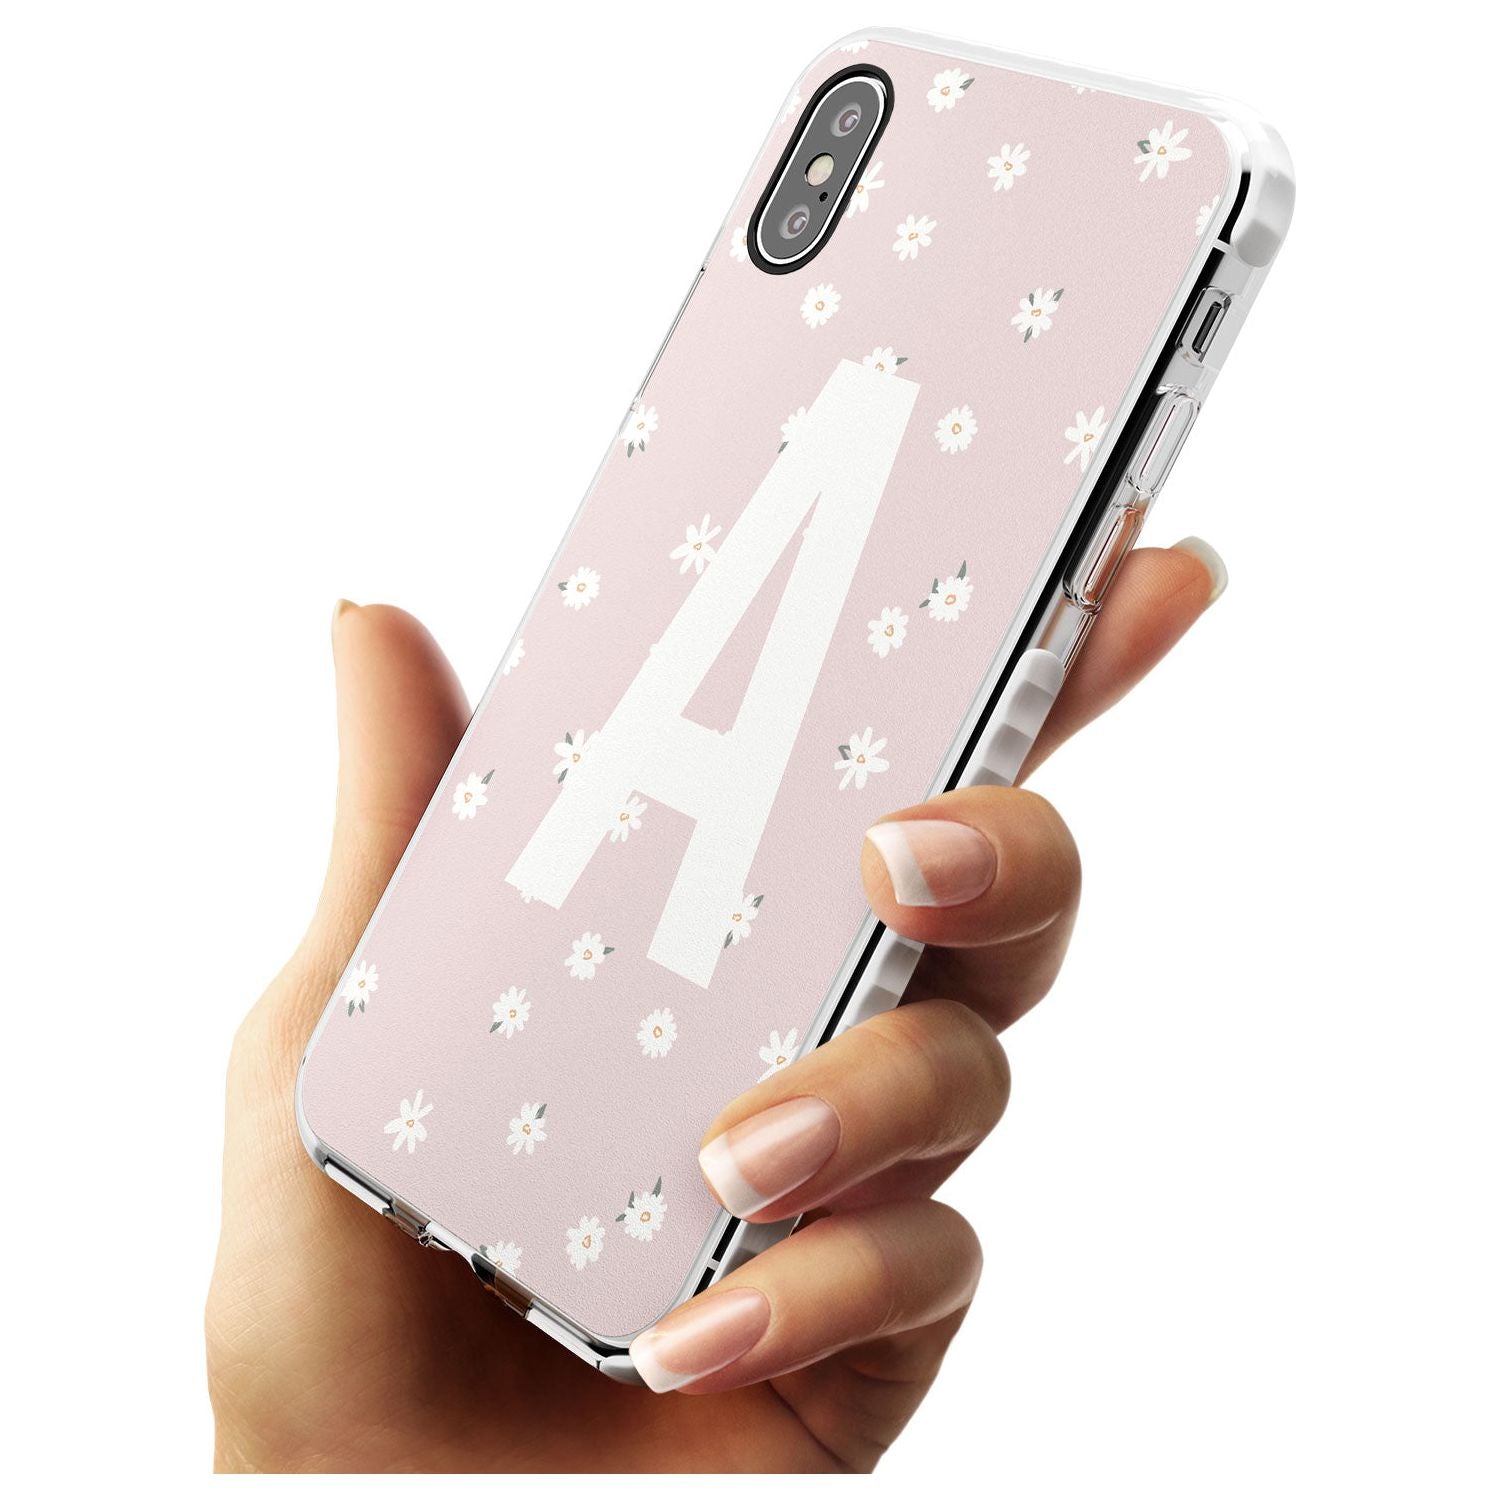 Pink Daisy Custom Impact Phone Case for iPhone X XS Max XR